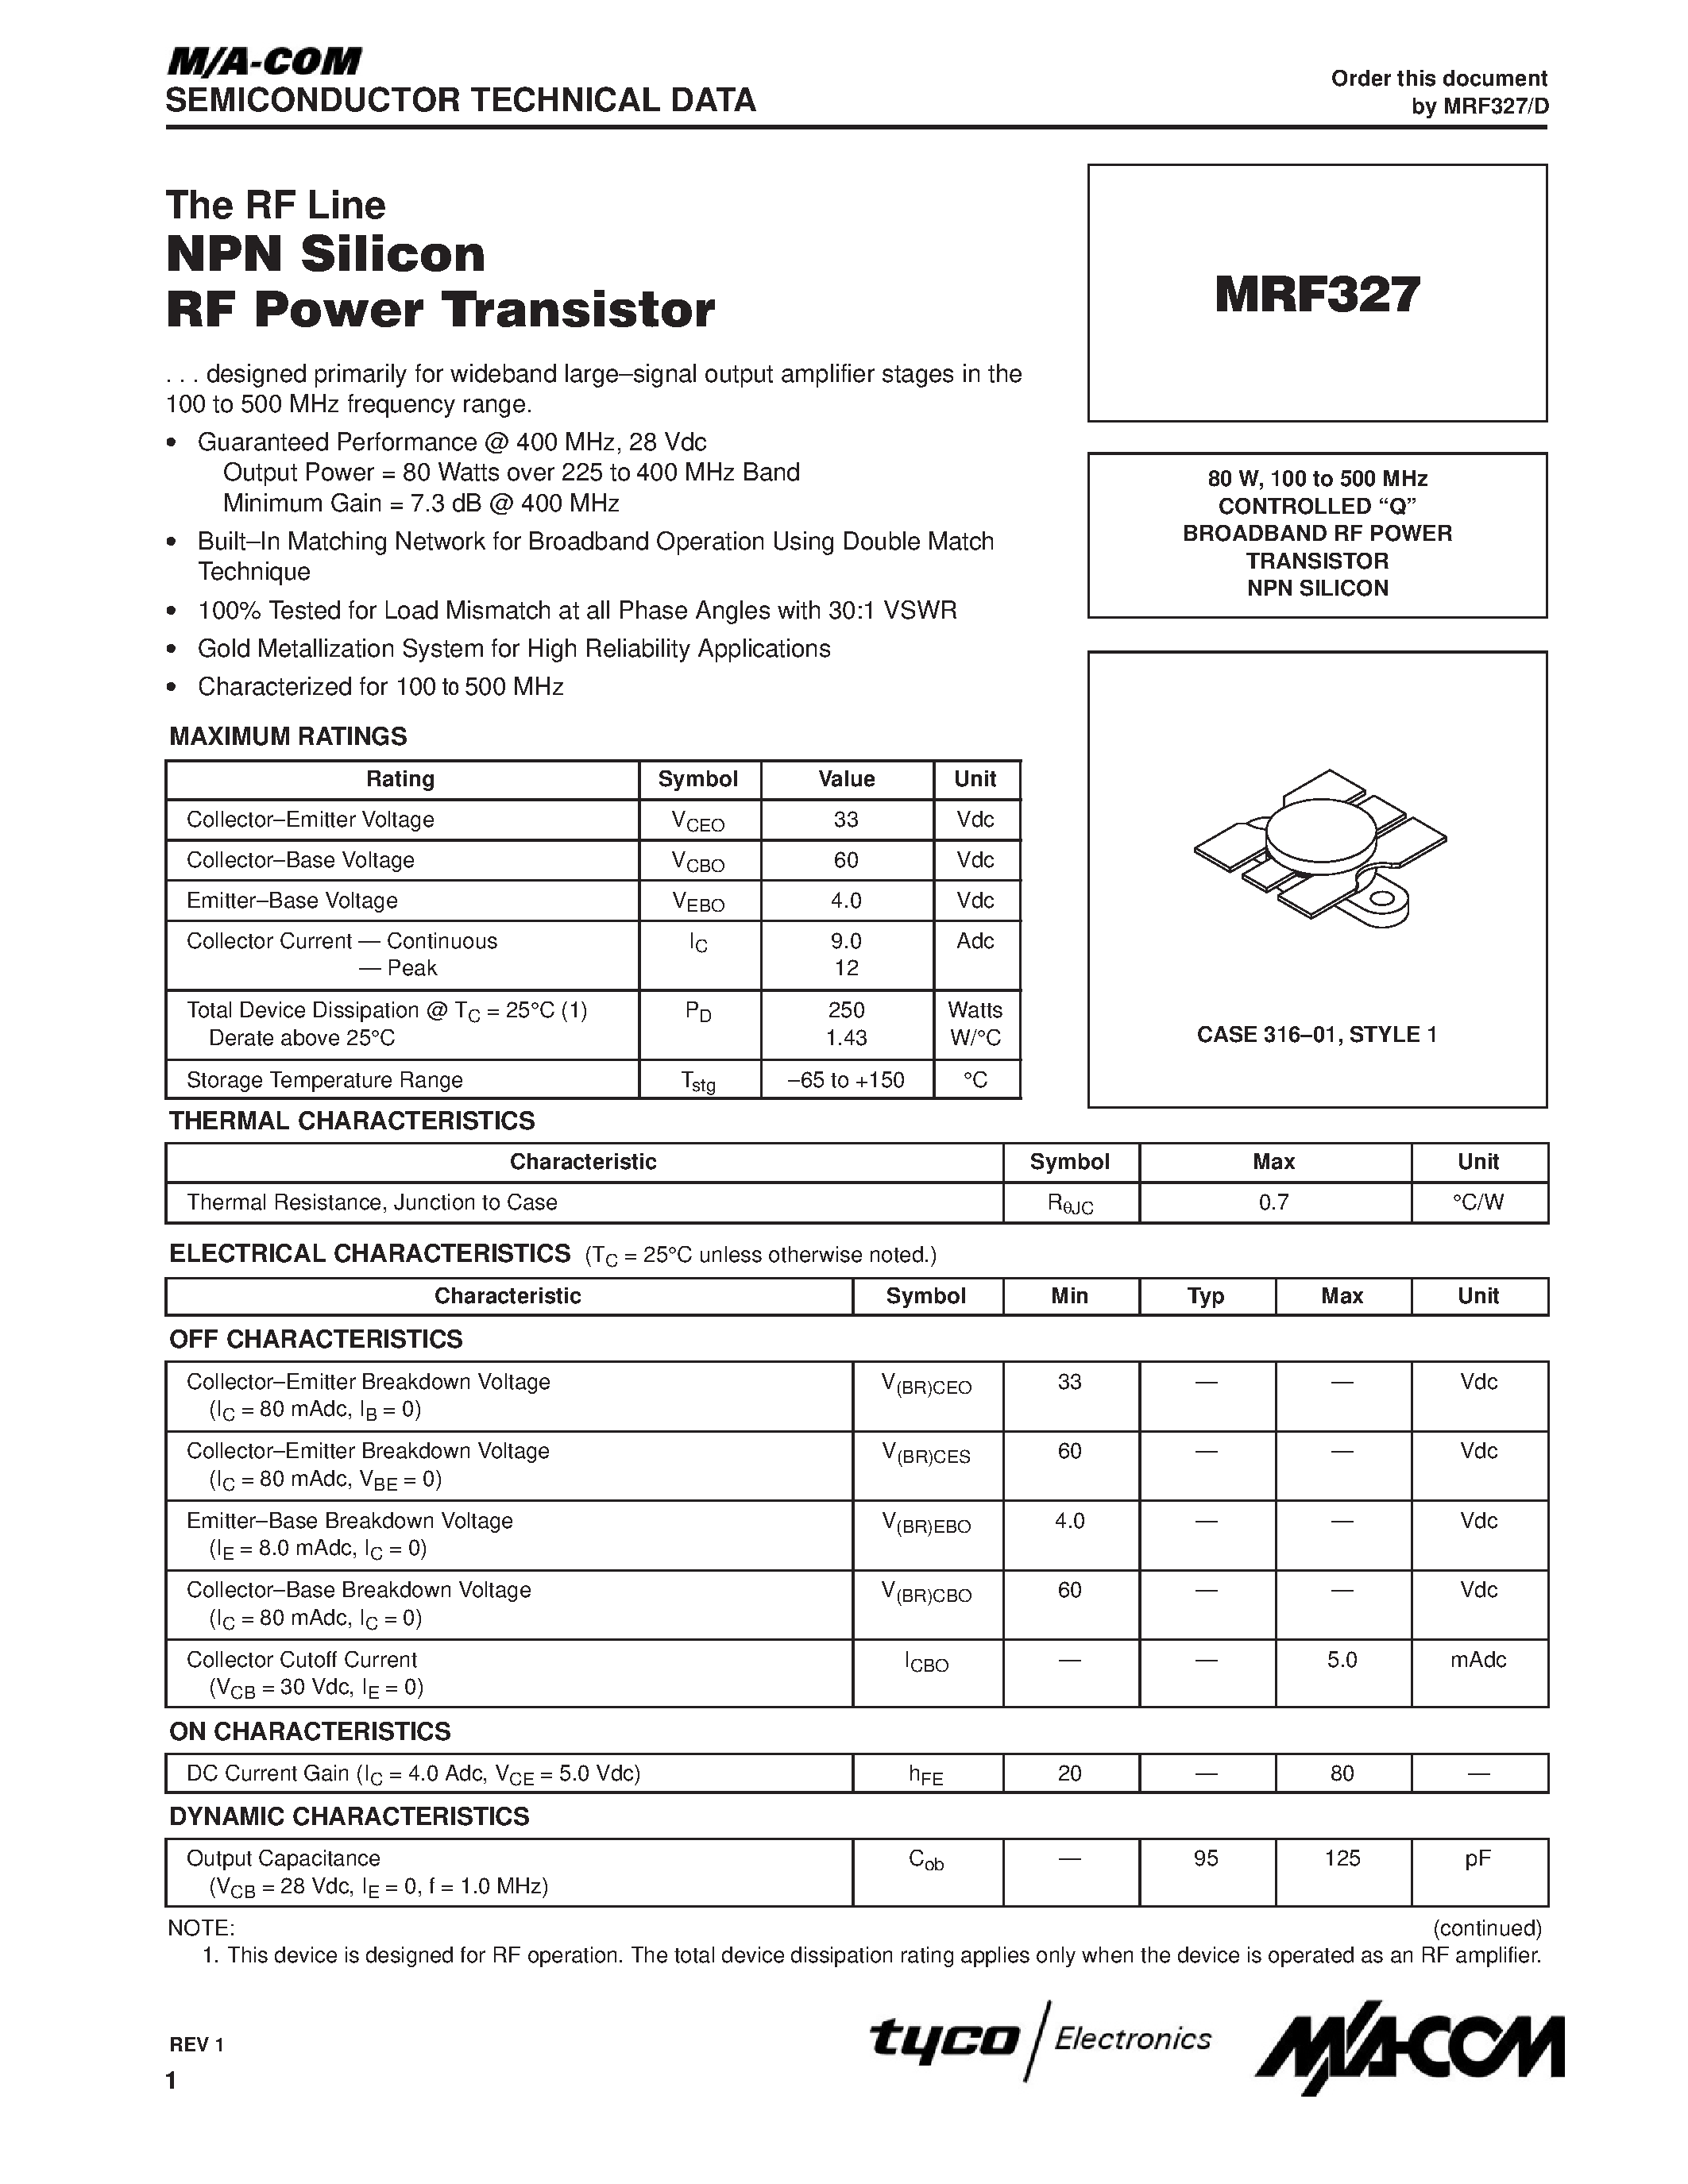 Datasheet M32000D4AFP - CONTROLLED Q BROADBAND RF POWER TRANSISTOR NPN SILICON page 1